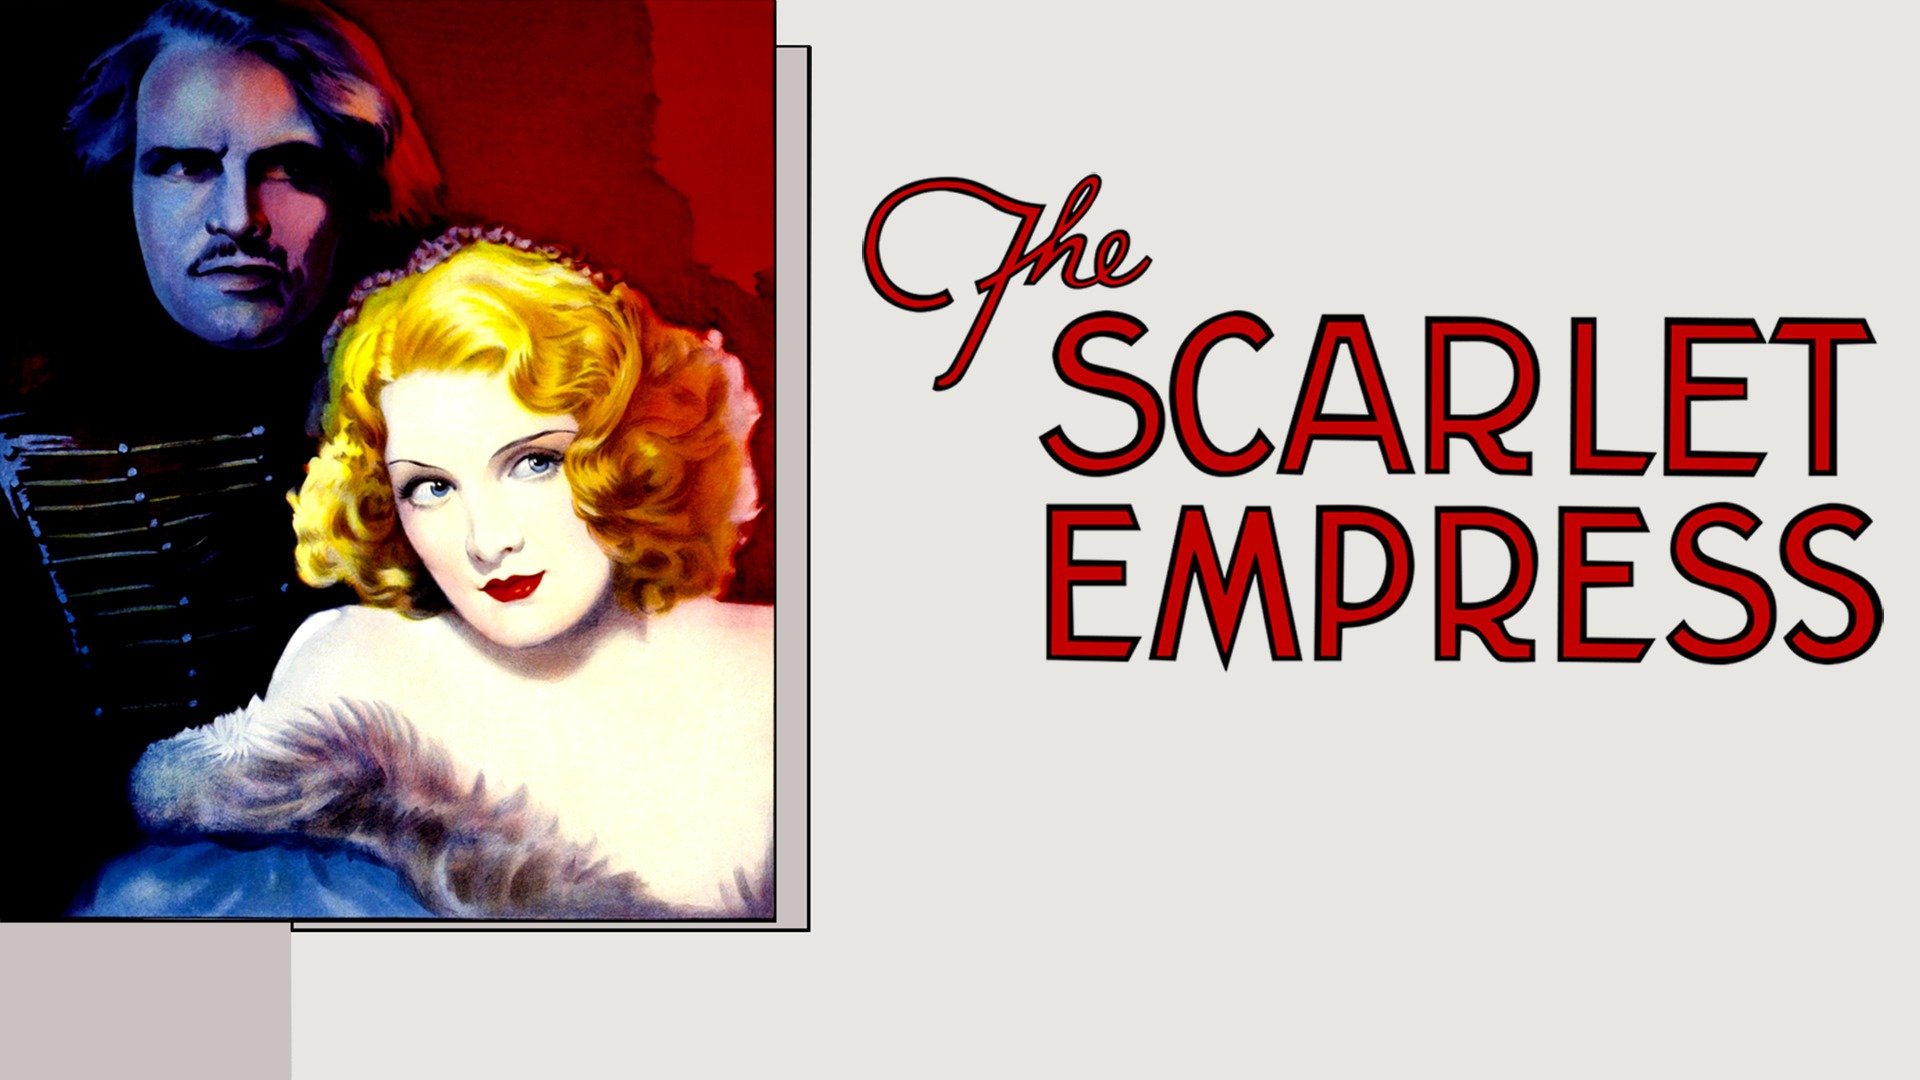 37-facts-about-the-movie-the-scarlet-empress